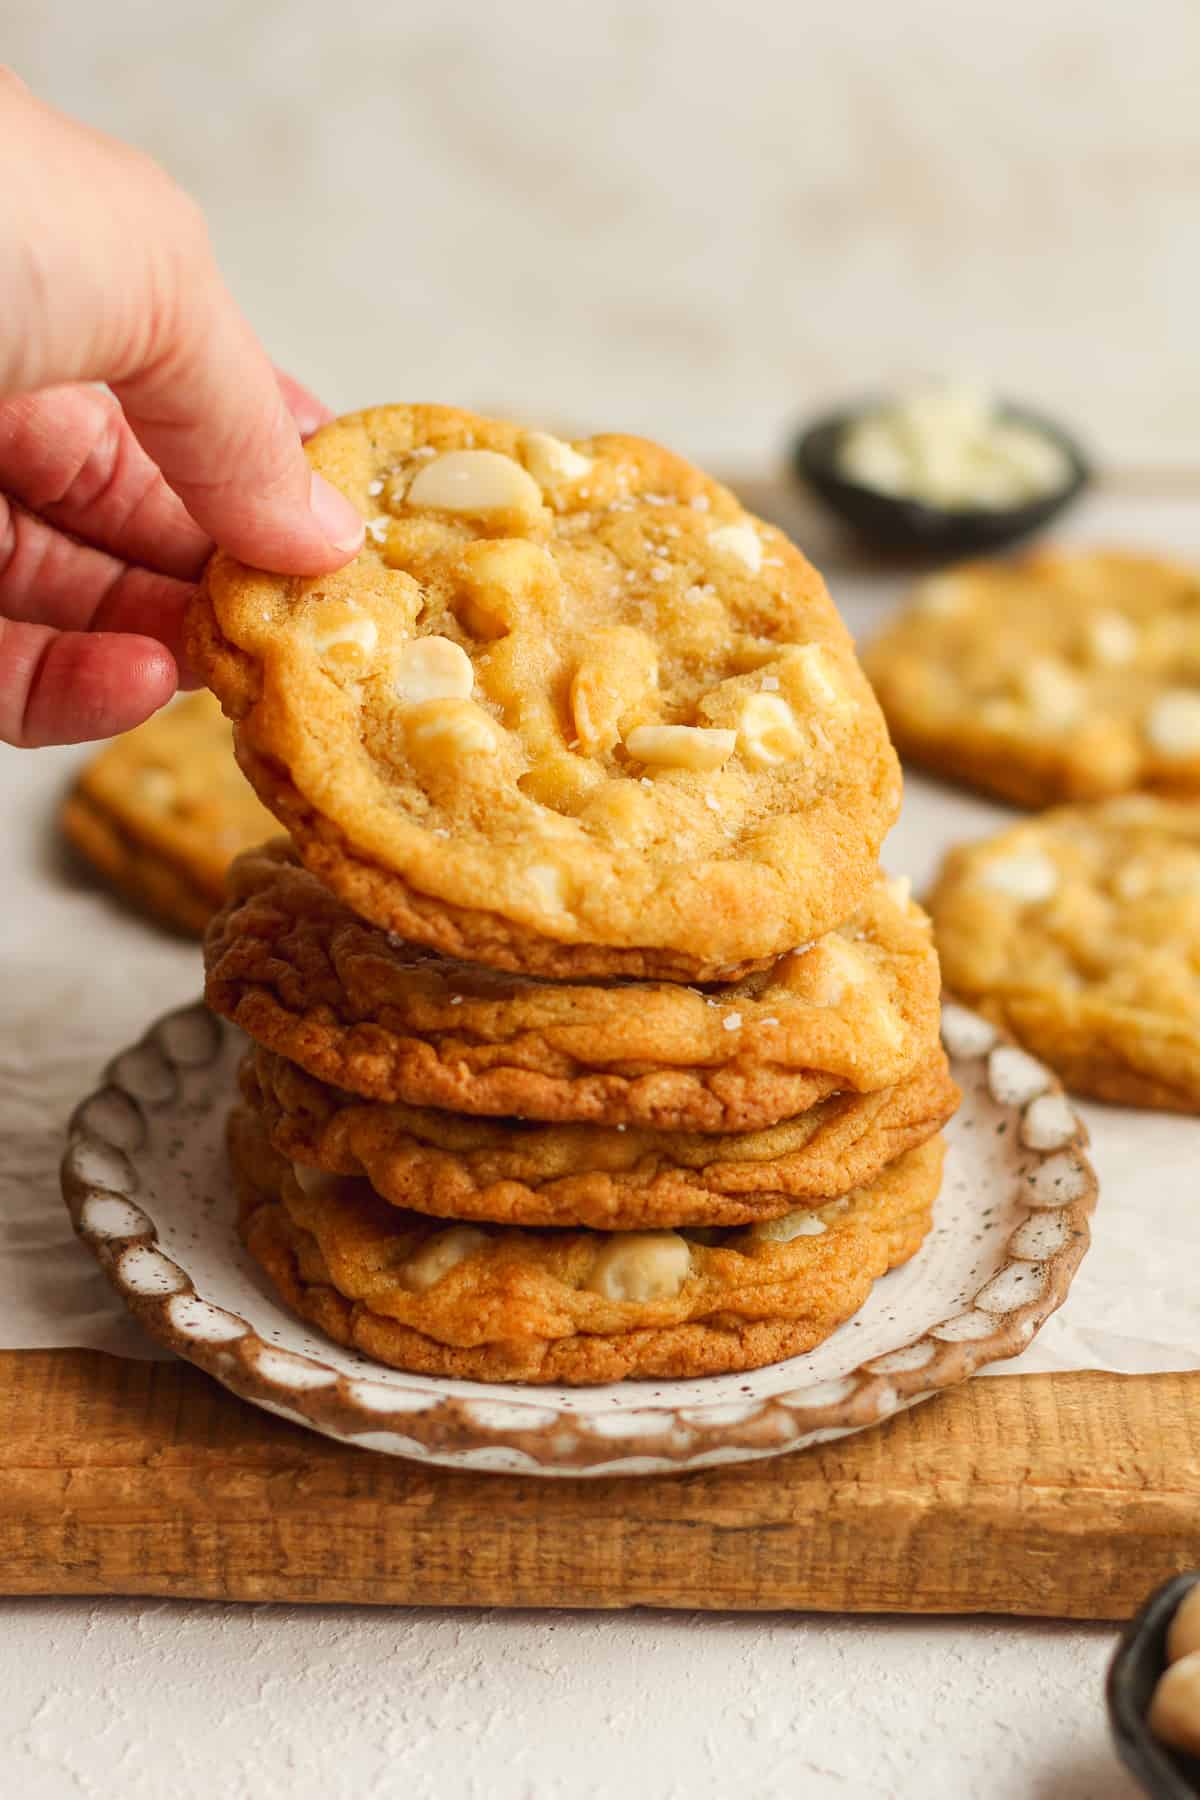 My hand reaching for a macadamia nut cookie on top of a stack of cookies.